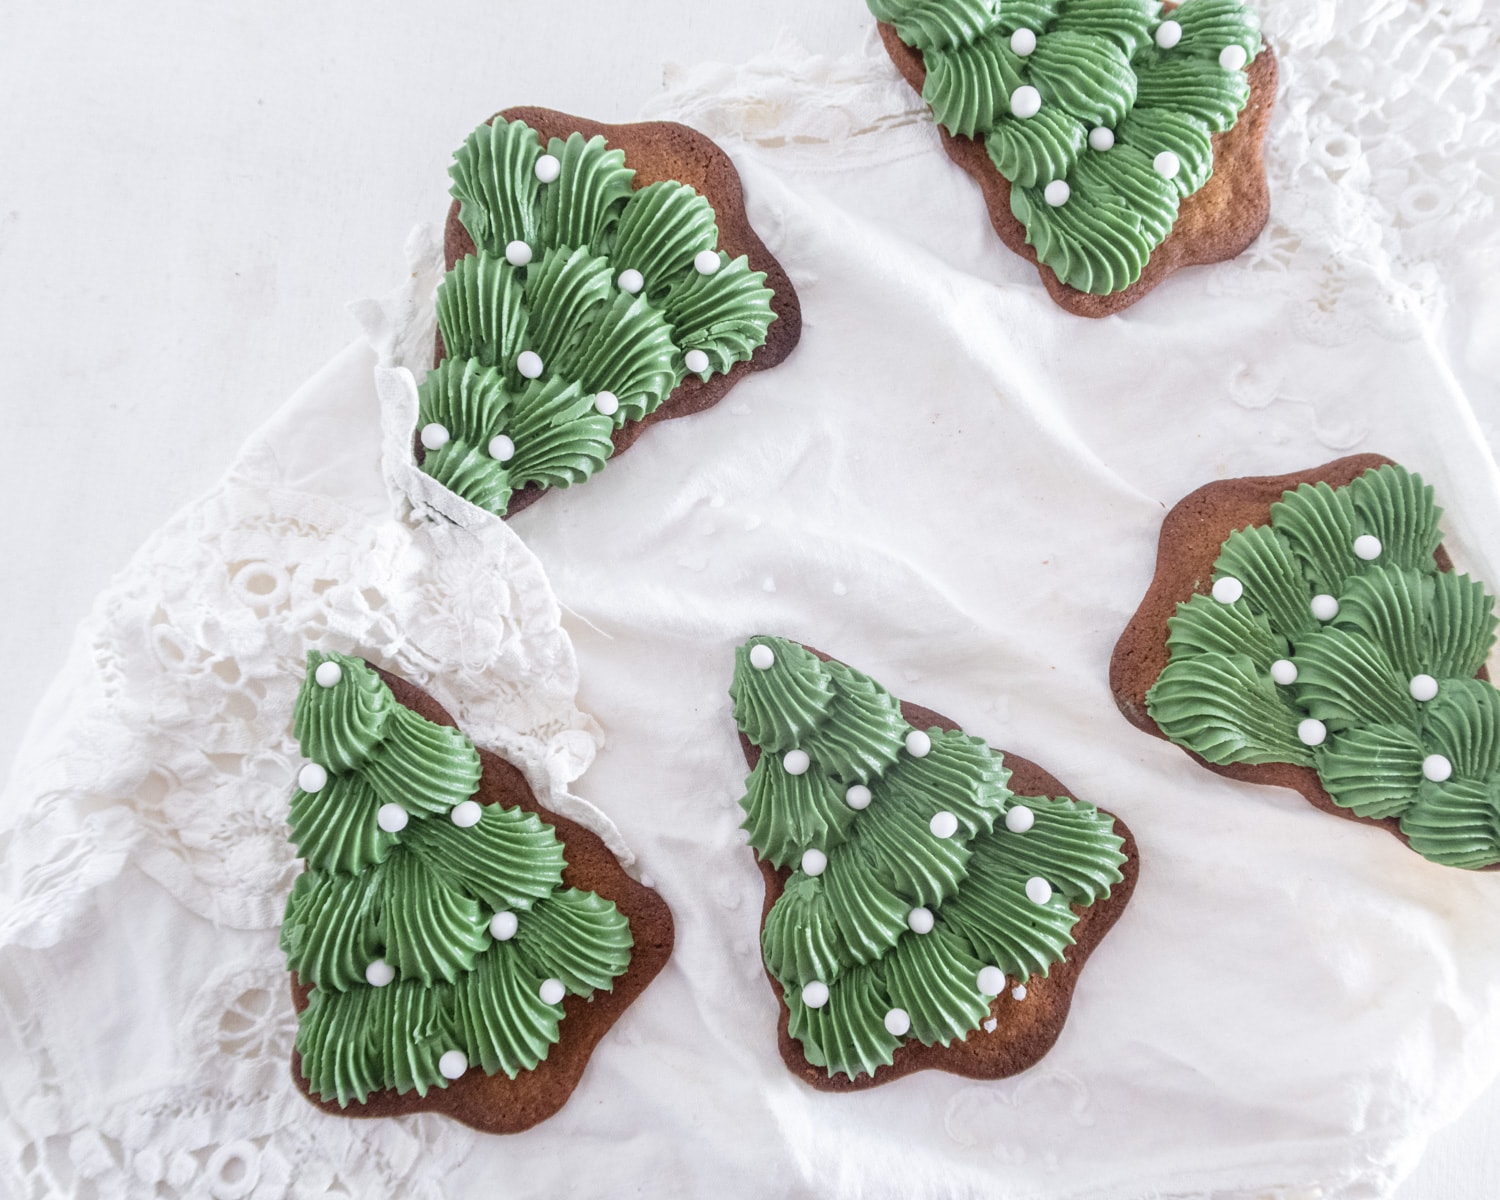 5 decorated gingerbread tree cookies on top of a white lace fabric